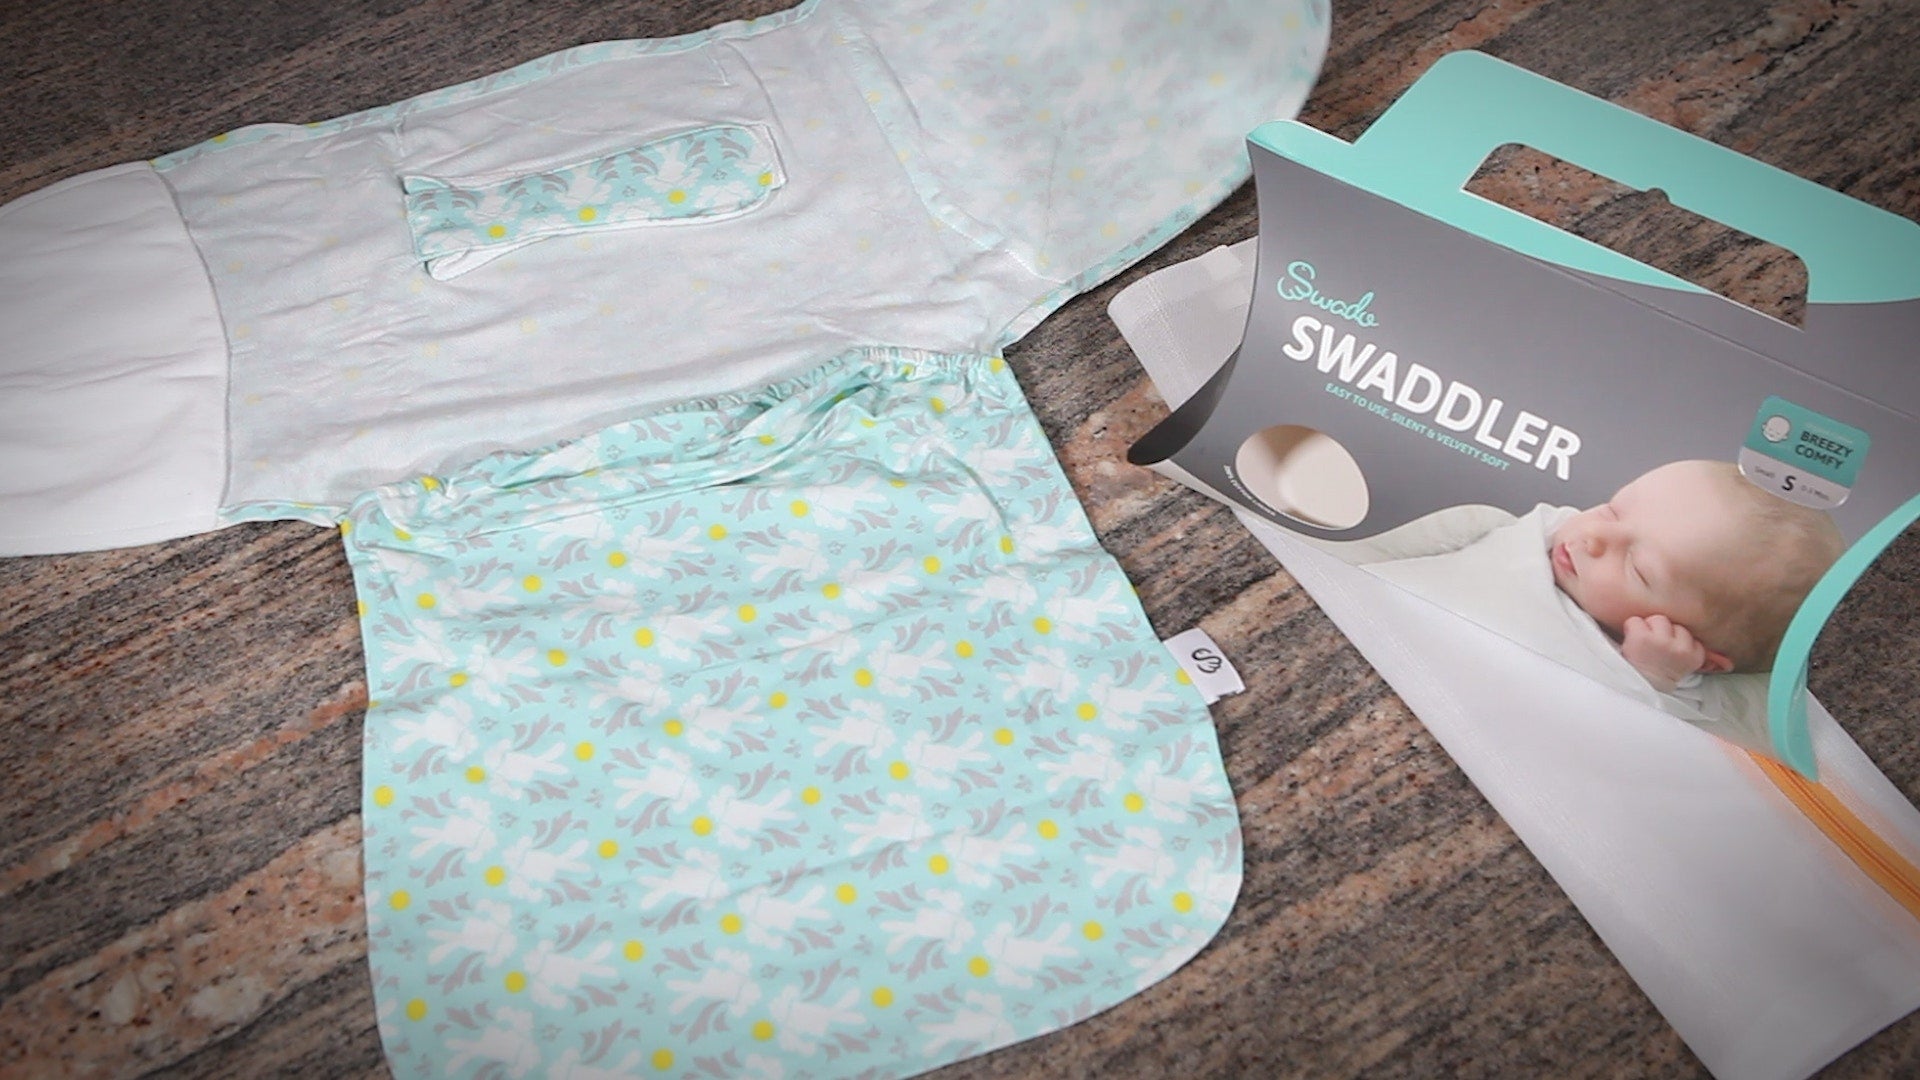 Swaddler diapers